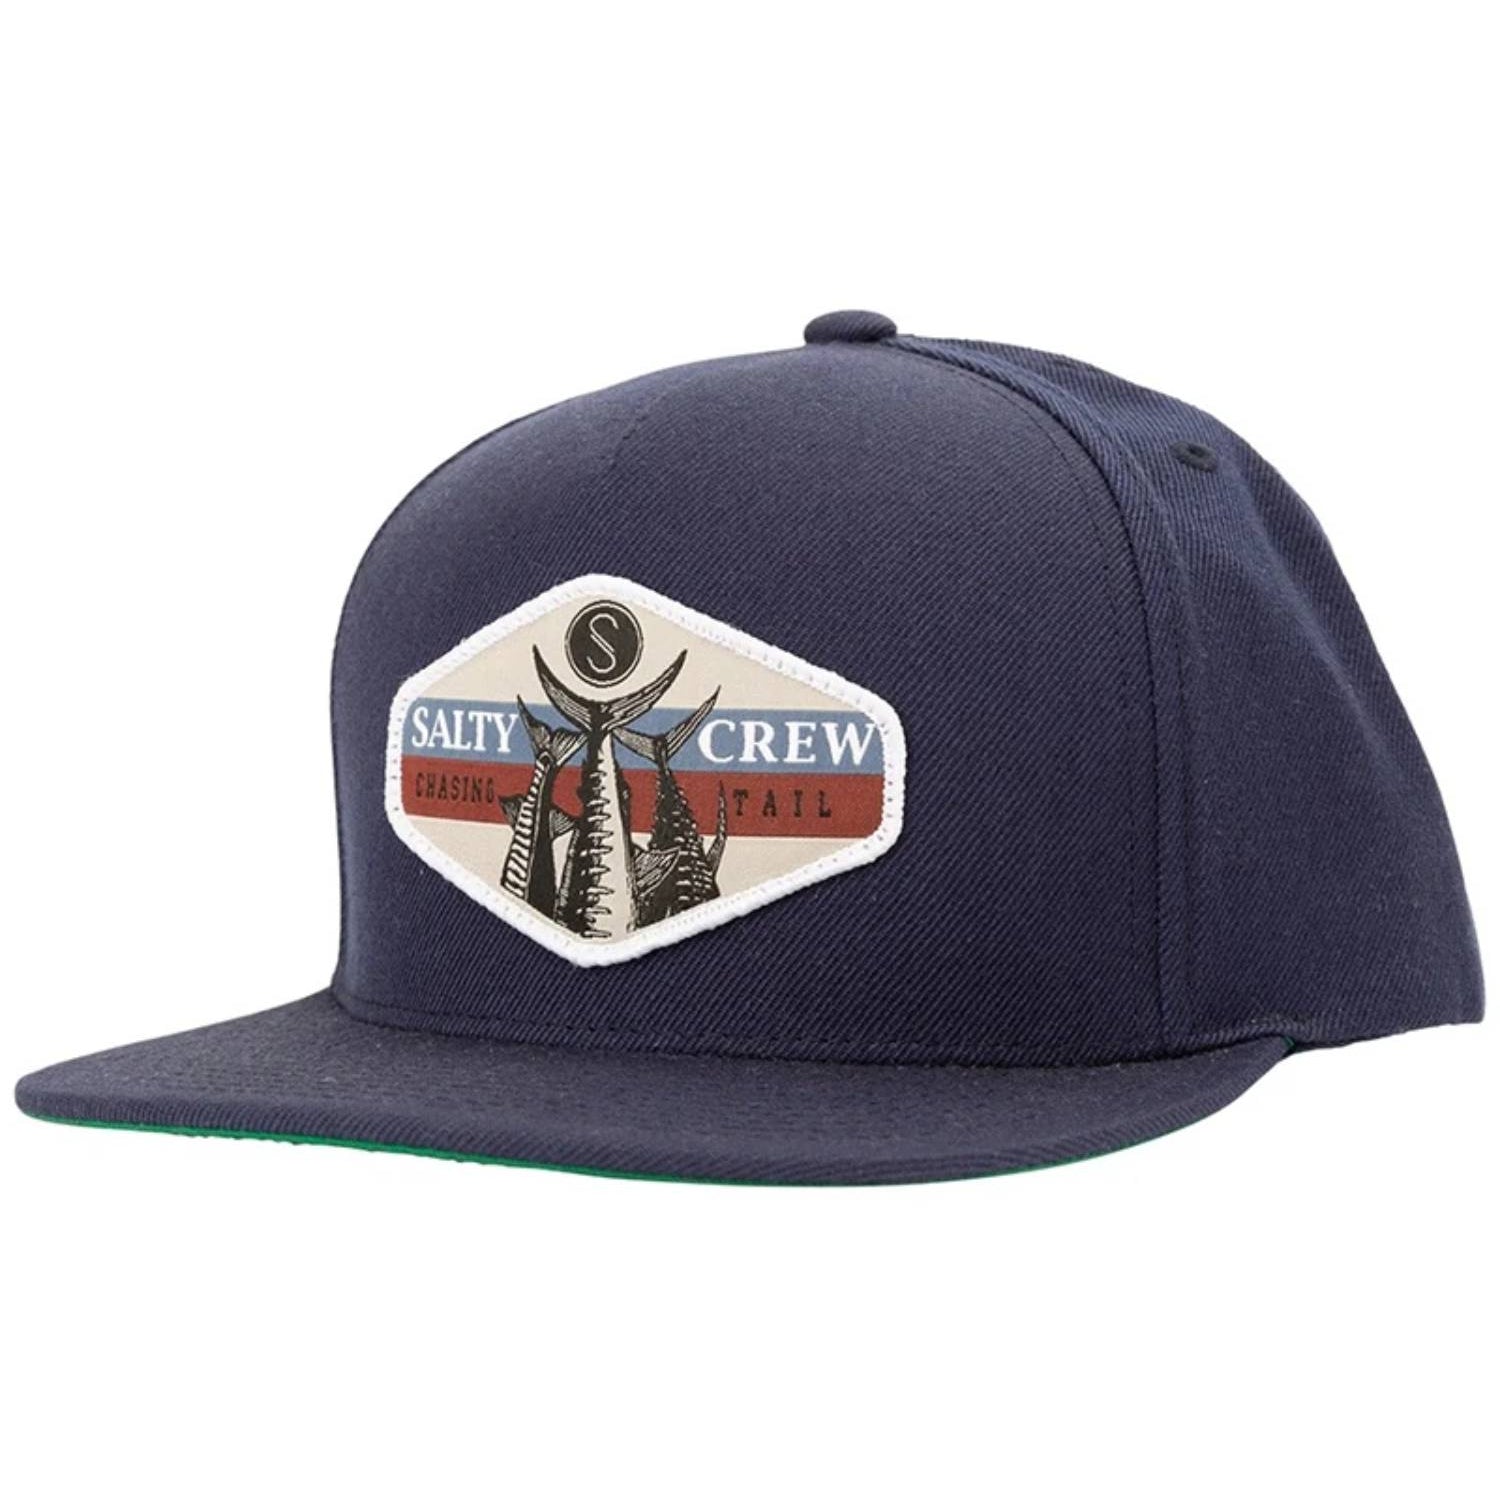 Salty Crew High Tail 5 Panel Hat Navy One Size